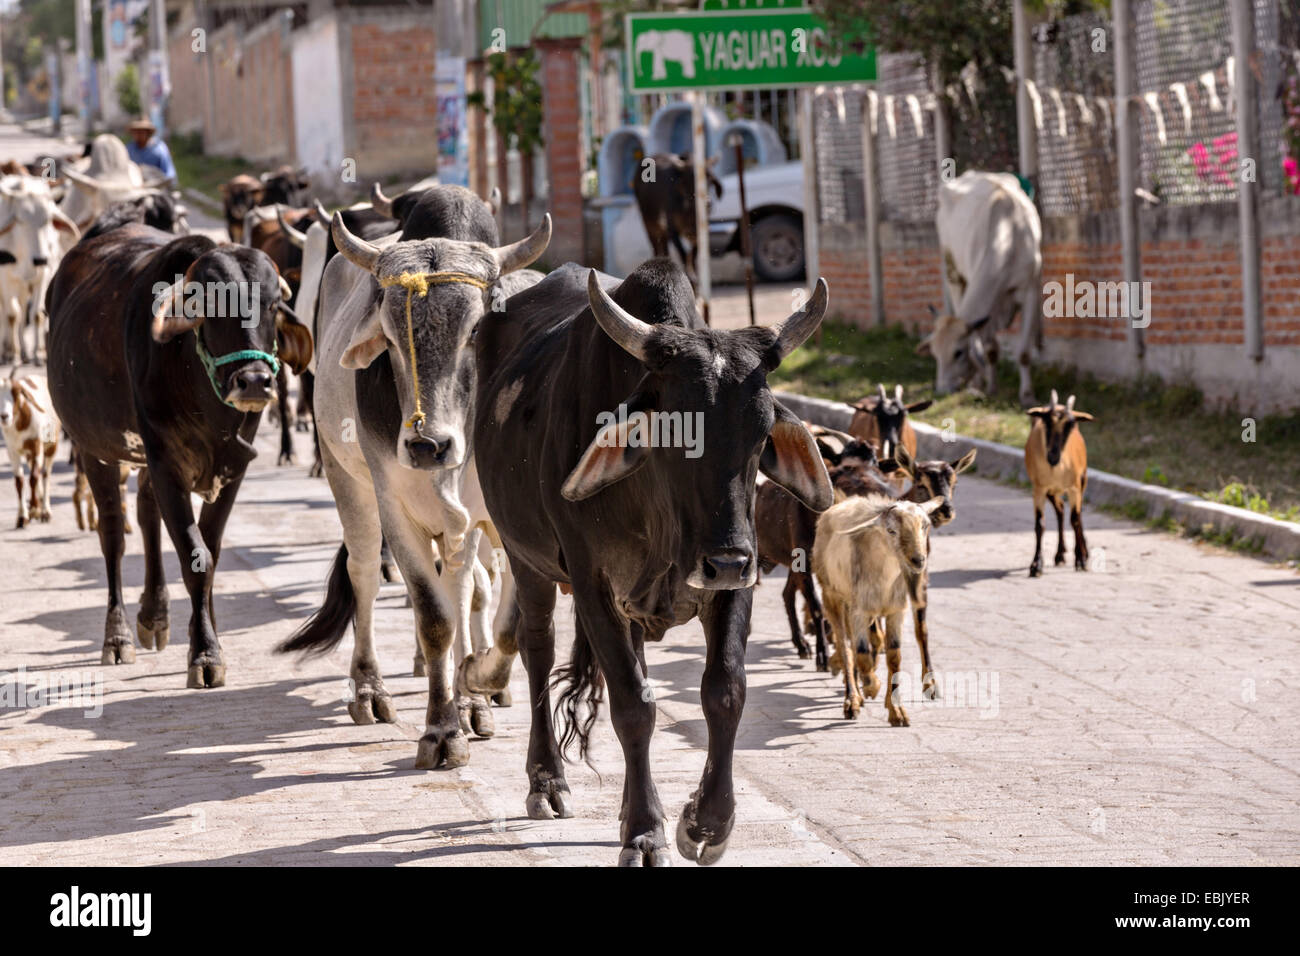 A mix of cattle, goats and sheep are herded down a village street by Mexican cowboys November 5, 2014 in Yaguar, Mexico. Stock Photo